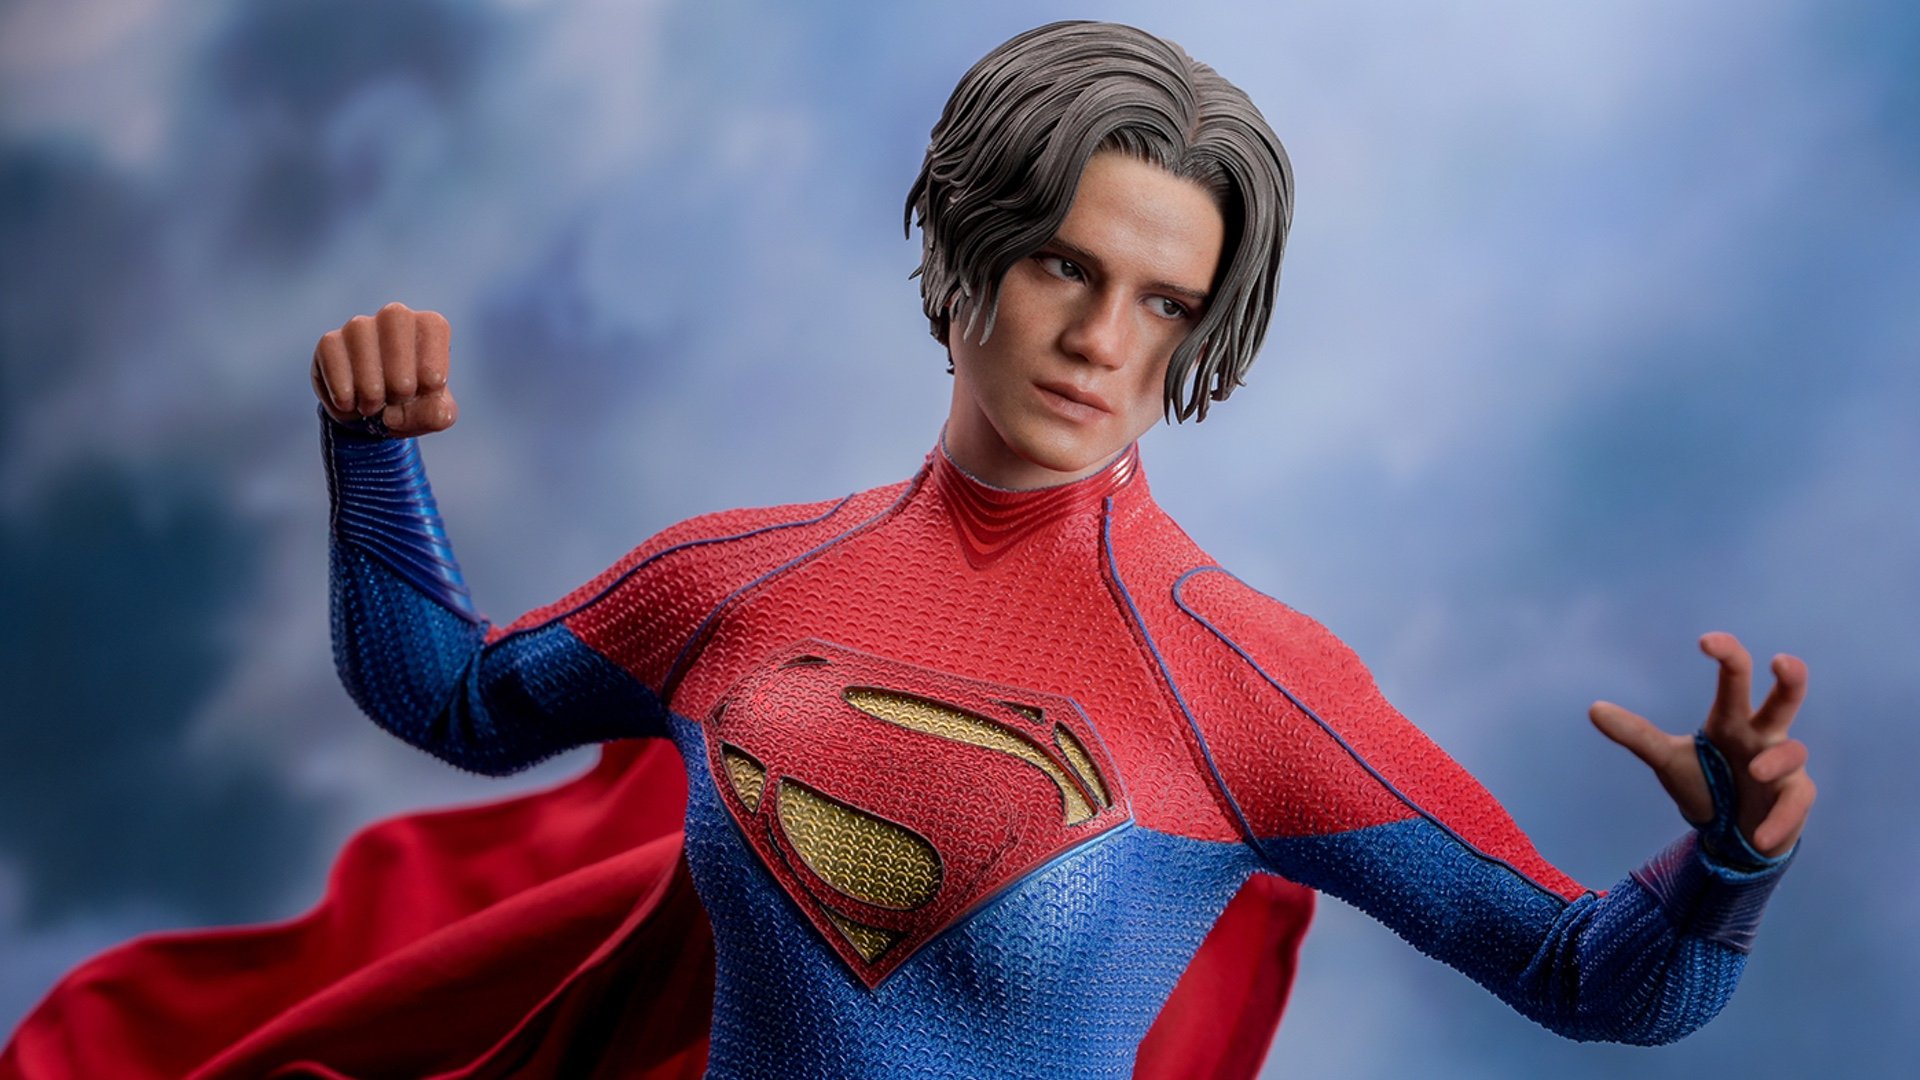 Hot Toys Reveals Its New THE FLASH Action Figure of Supergirl